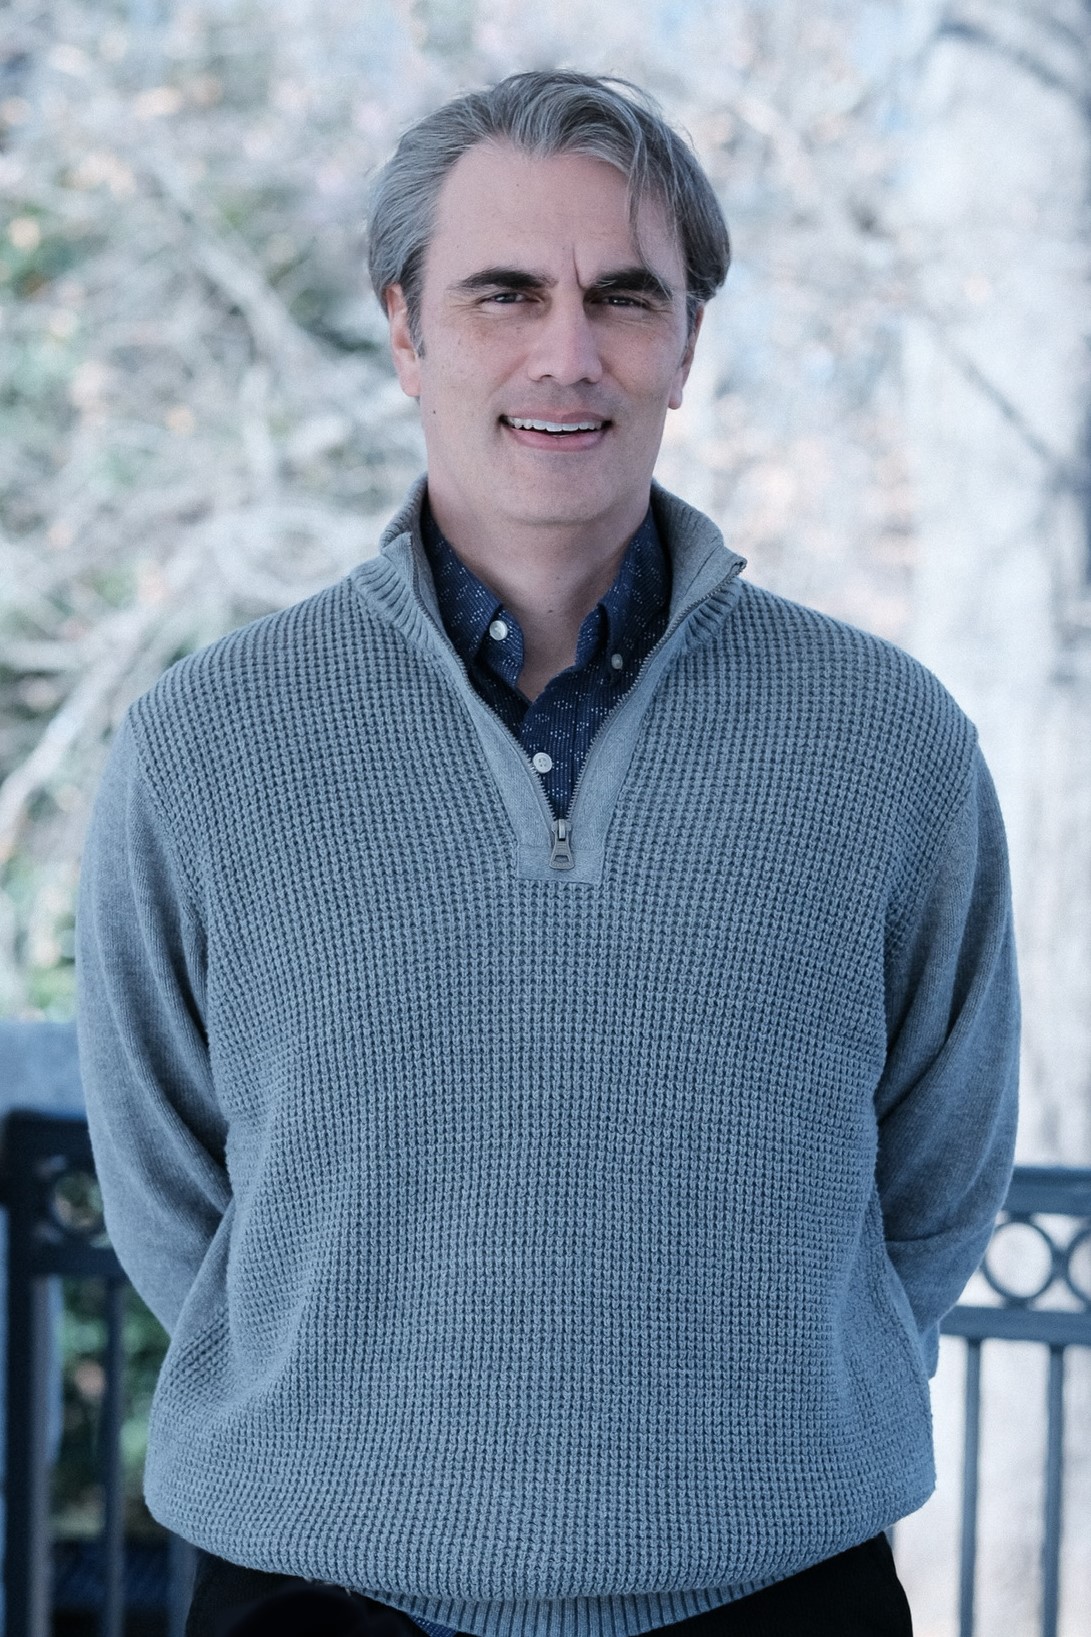 Picture of Jeremy Wilhelm wearing a quarter-zip sweater while standing outdoors.